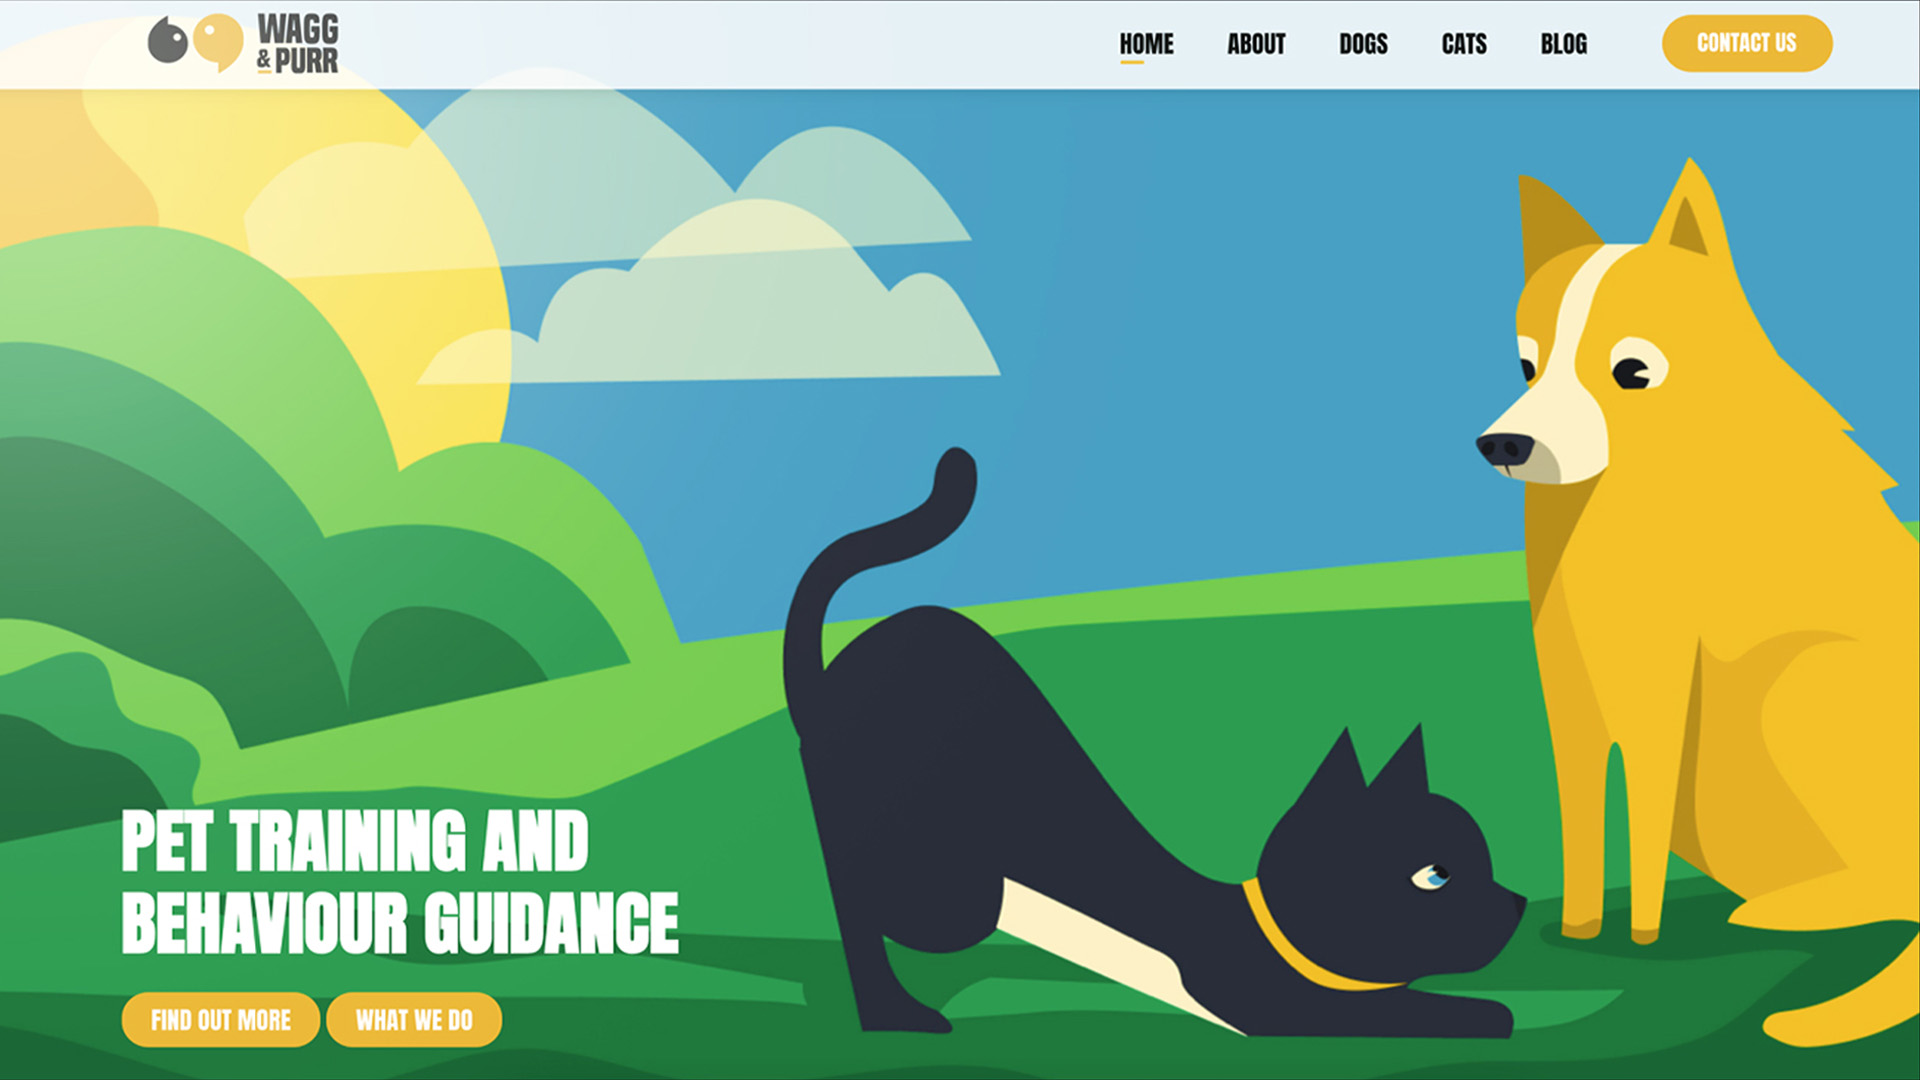 Wagg & Purr homepage